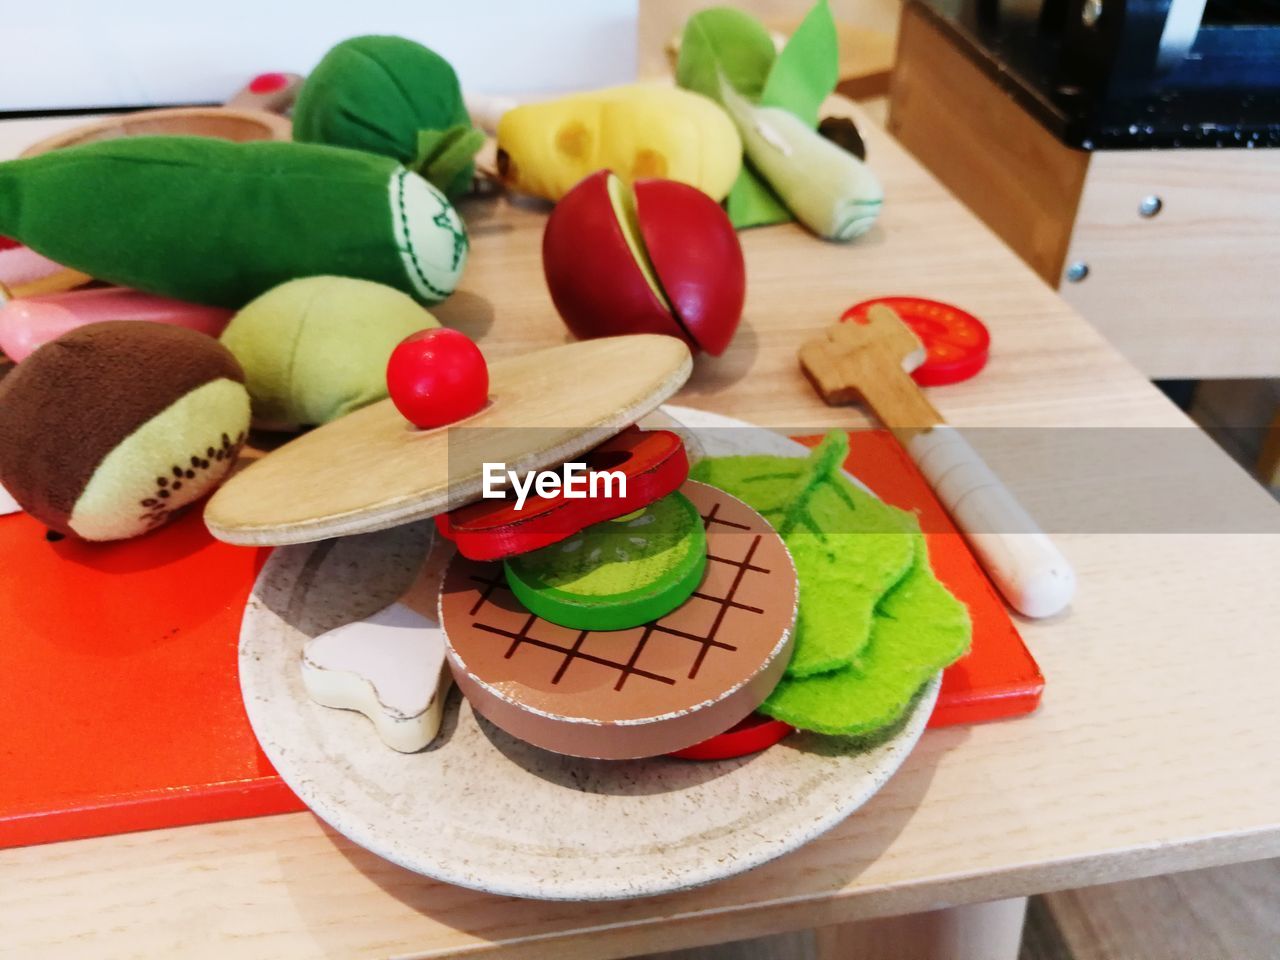 HIGH ANGLE VIEW OF CHOPPED FRUITS ON TABLE